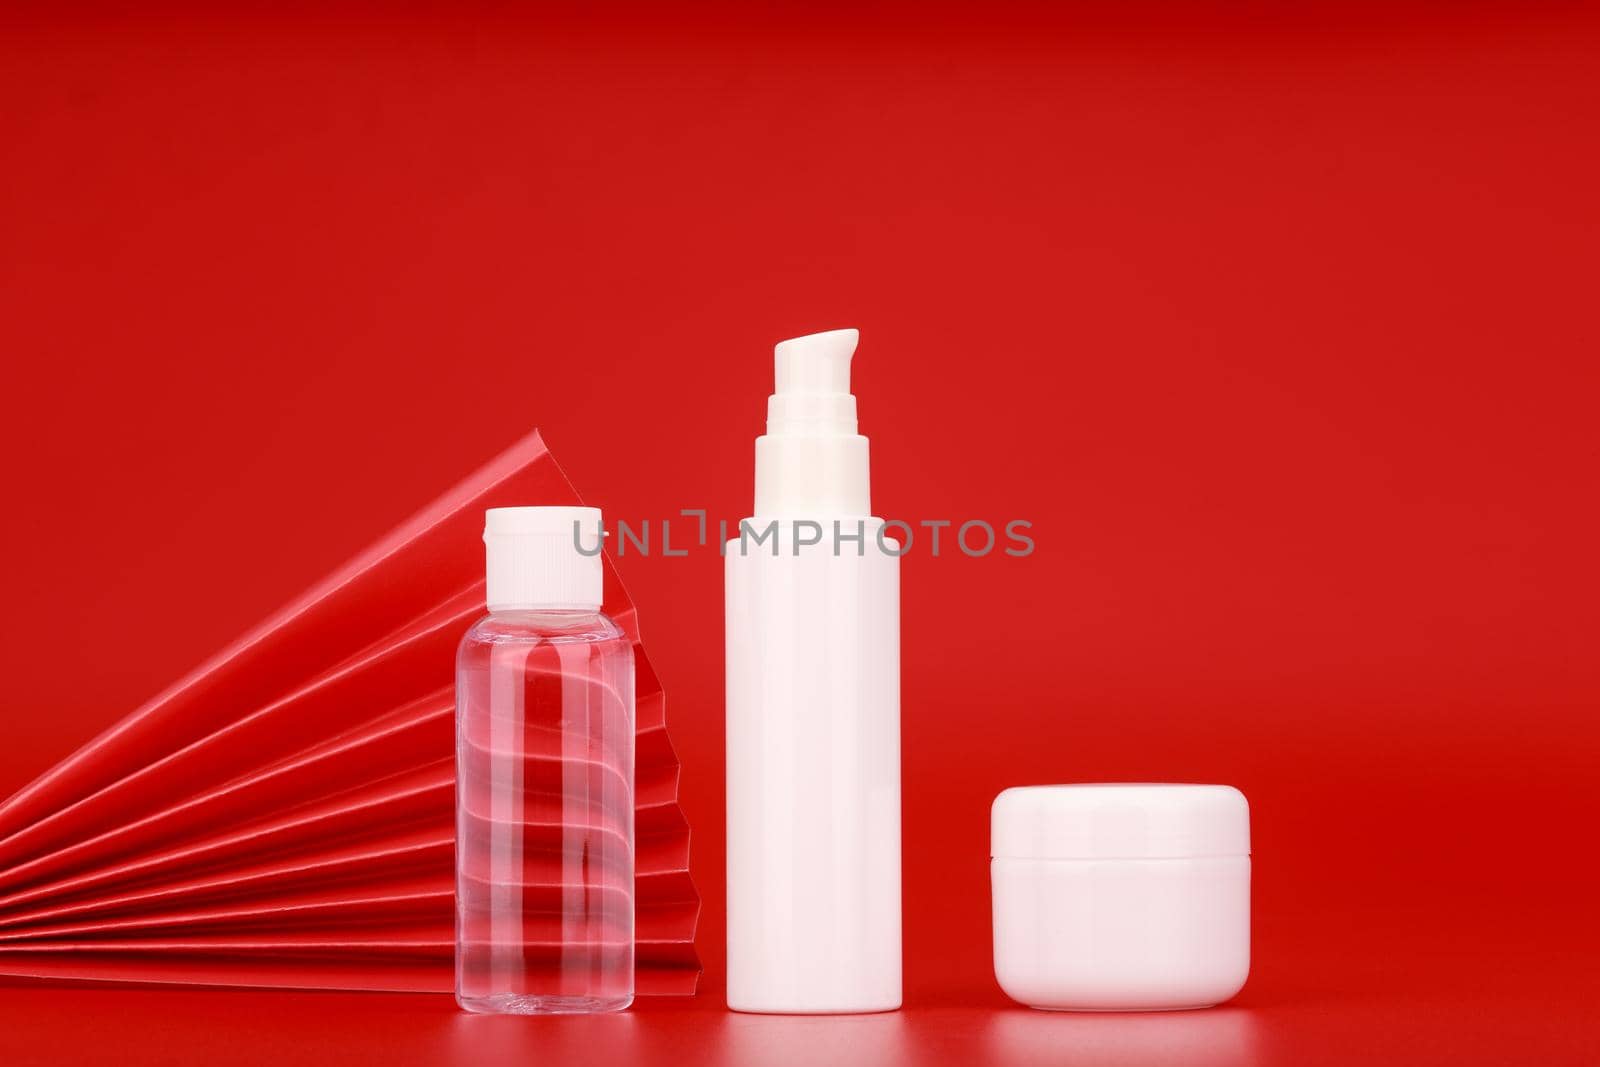 Set of skin care products, lotion, cream and scrub against red background decorated with waver. Concept of luxury or asian style beauty products